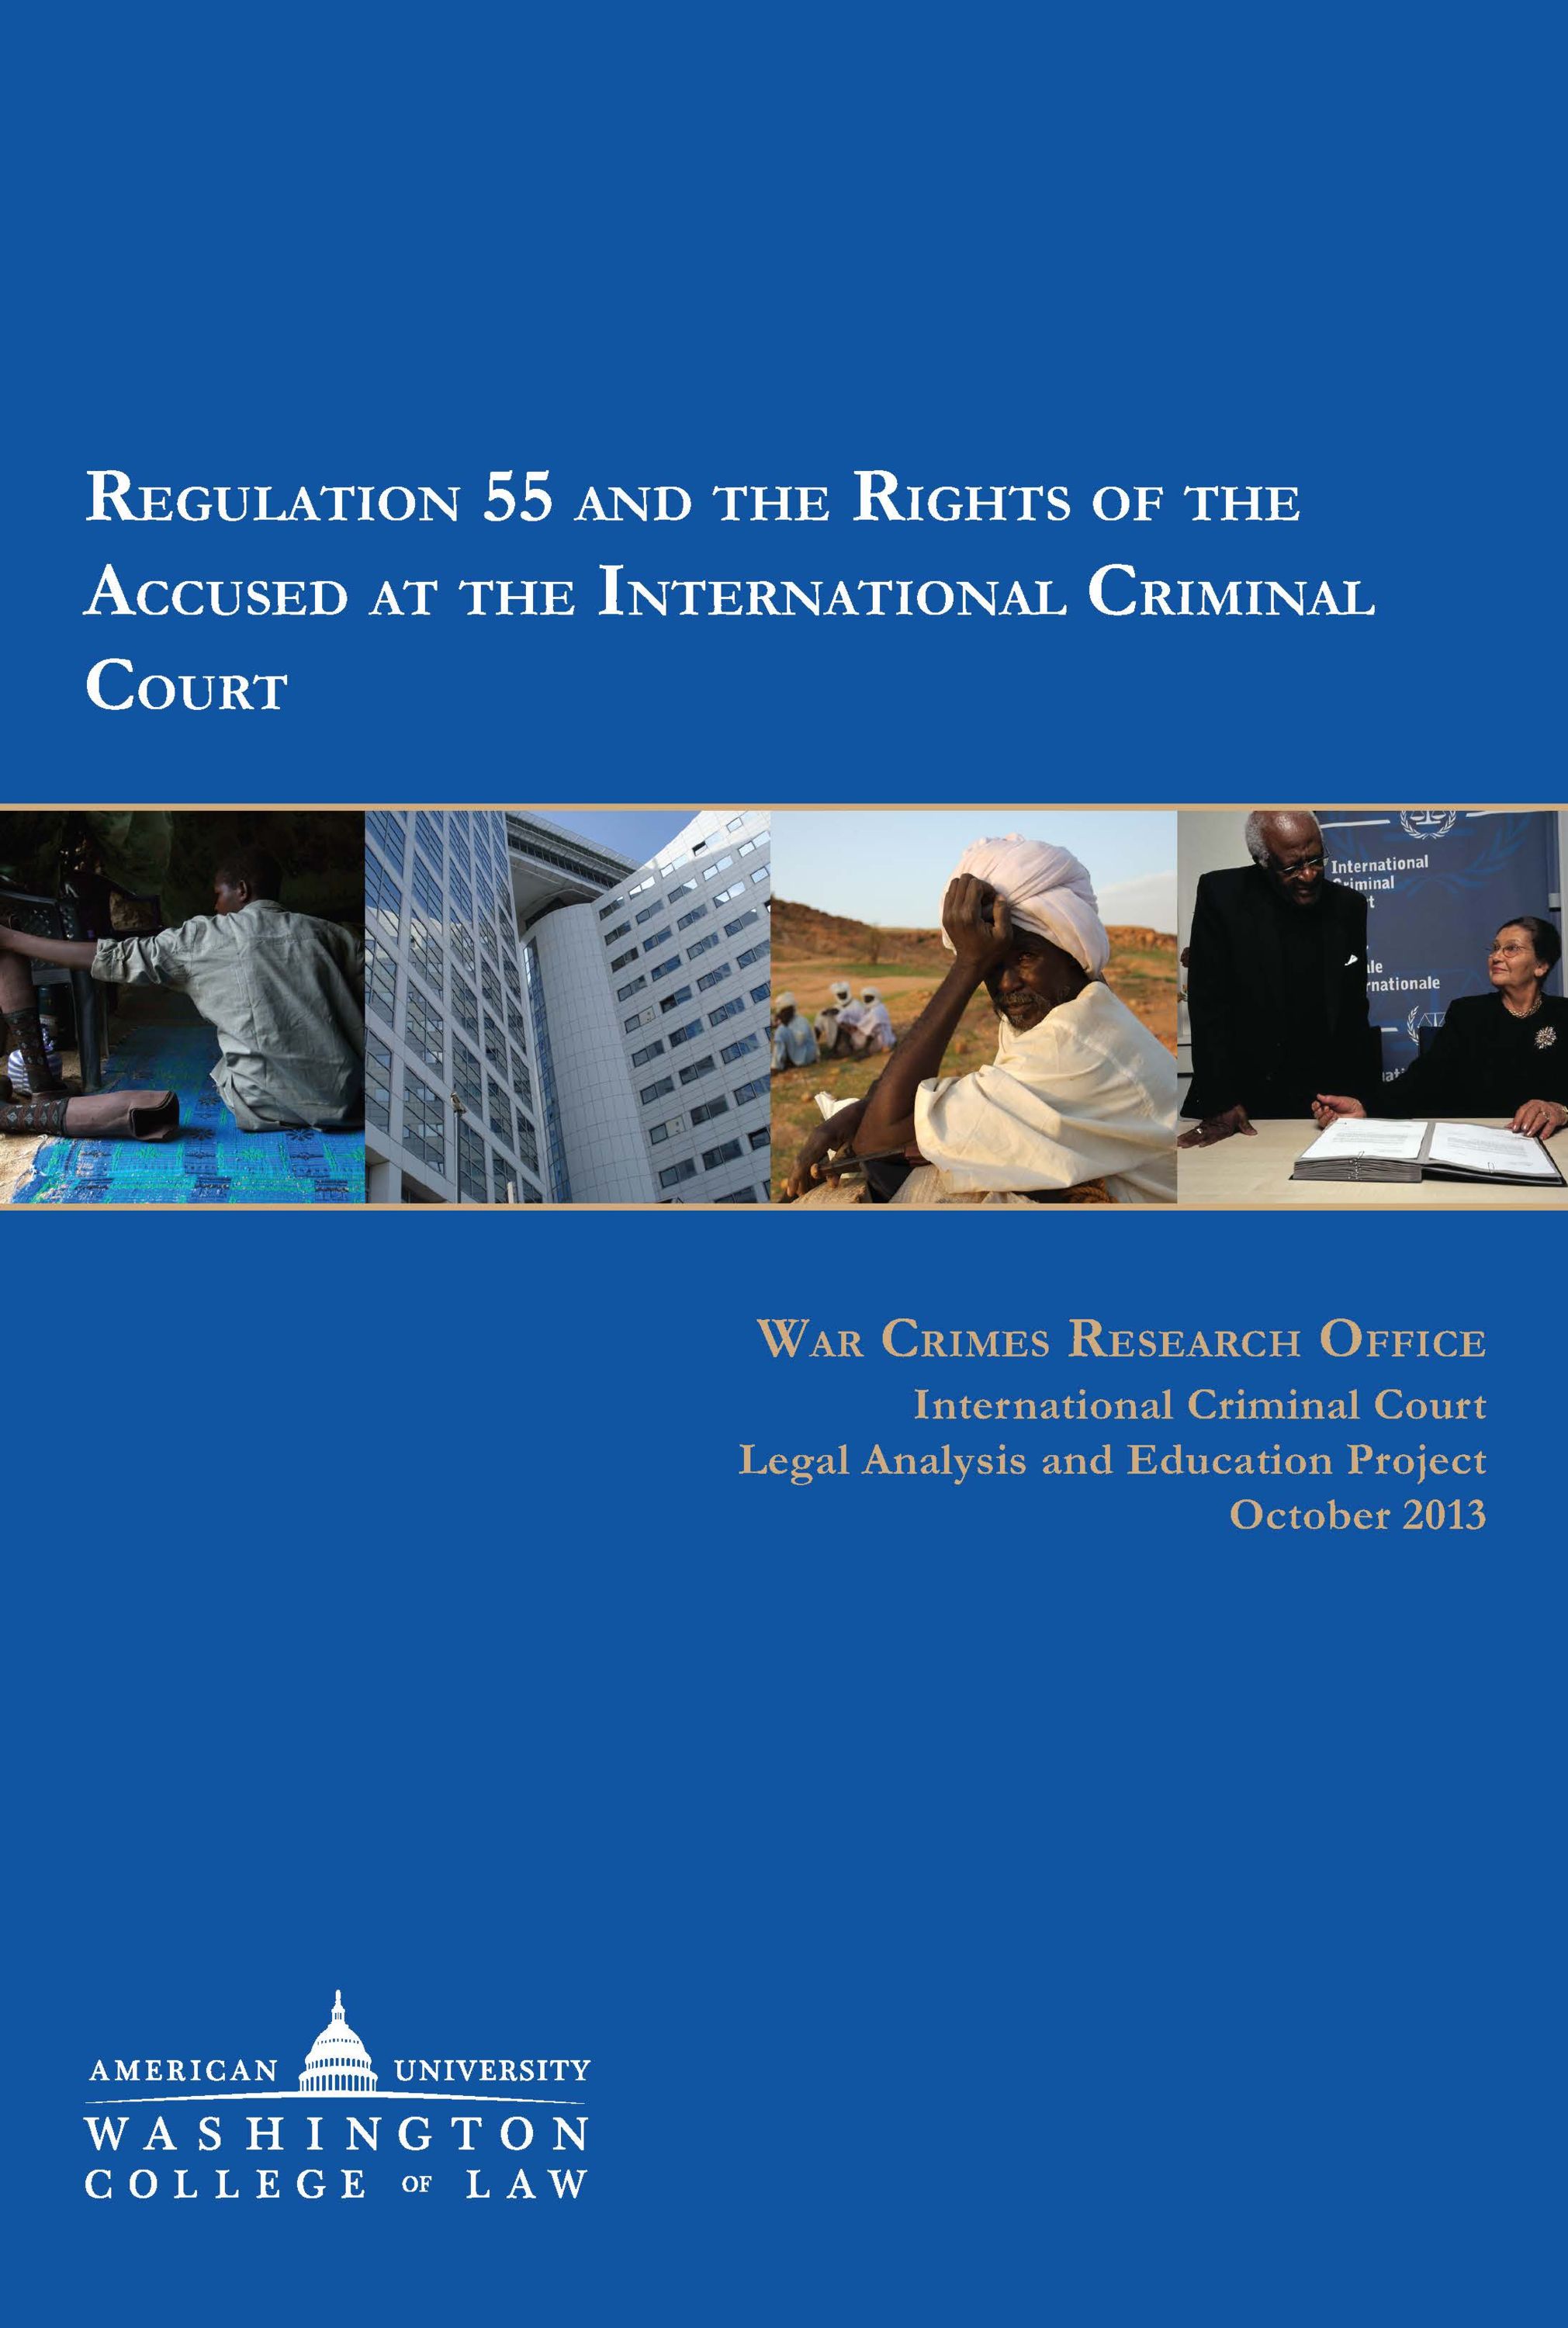 Report 17: Regulation 55 and the Rights of the Accused at the International Criminal Court